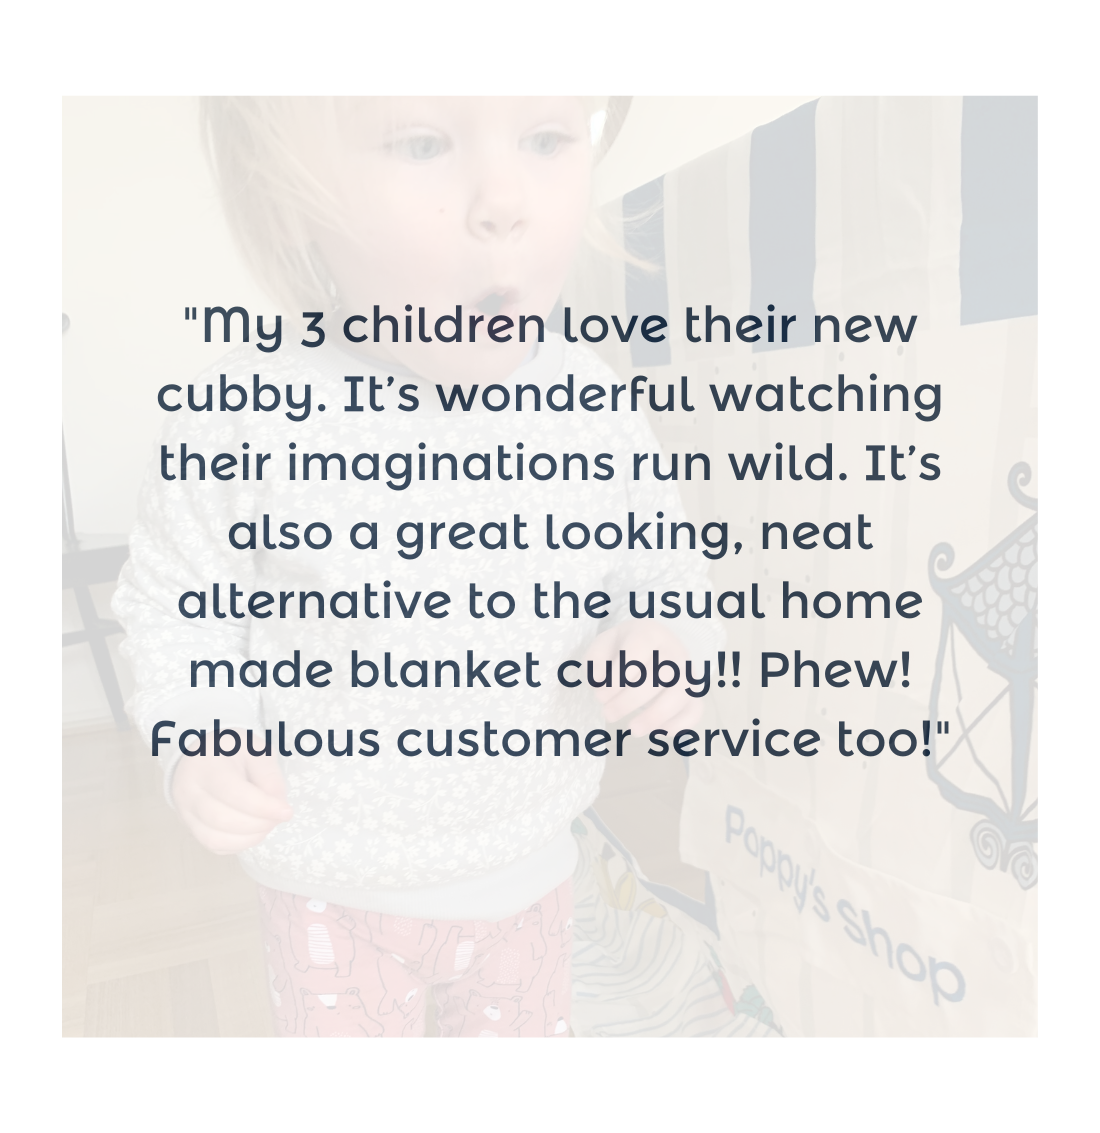 "My 3 children love their new cubby. It’s wonderful watching their imaginations run wild. It’s also a great looking, neat alternative to the usual home made blanket cubby!! Phew! Fabulous customer service too!"